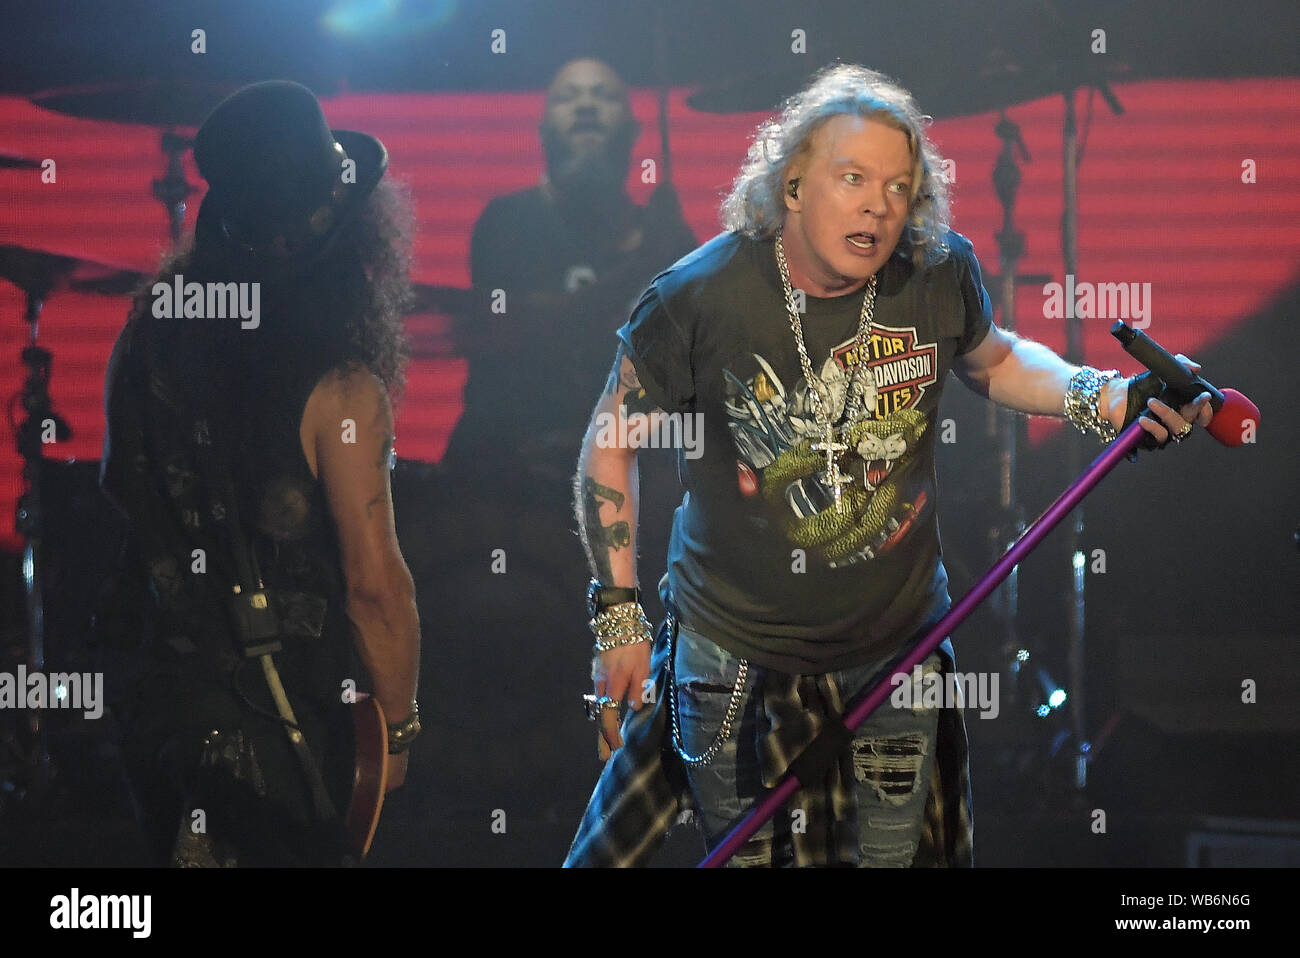 Rio de Janeiro, September 24, 2017. Singer Axl Rose from the band Guns N ' Roses, during her show at Rock in Rio 2017 in the city of Rio de Janeiro,  Br Stock Photo - Alamy